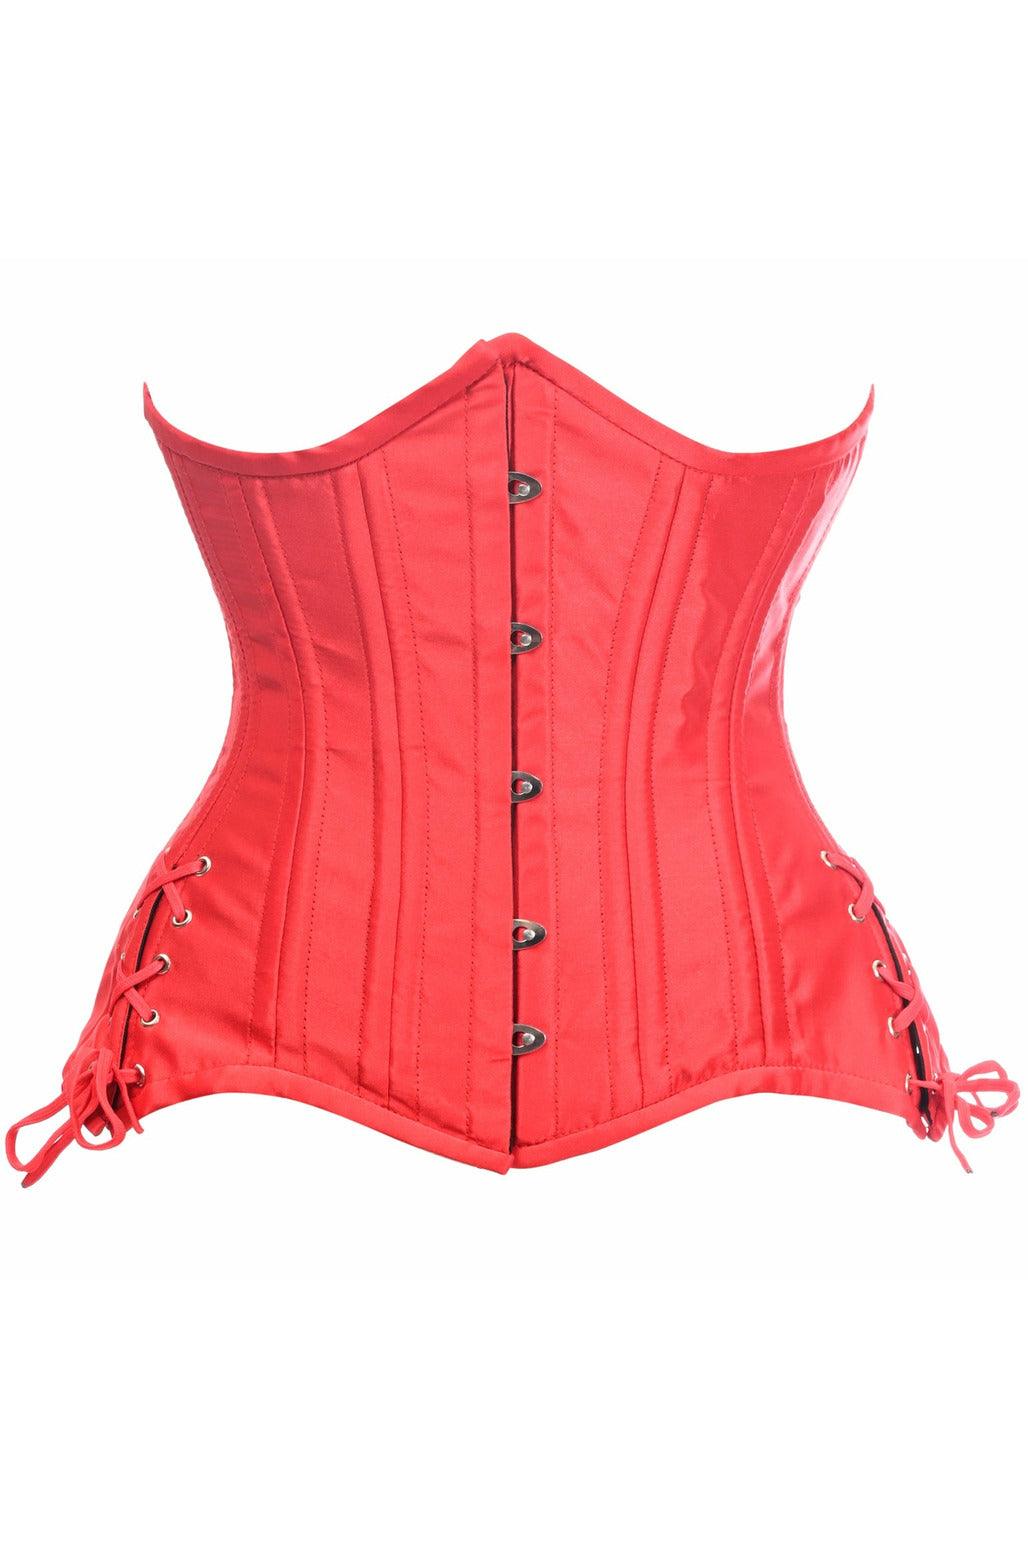 Top Drawer Red Satin Double Steel Boned Curvy Cut Waist Cincher Corset w/Lace-Up Sides - Flyclothing LLC